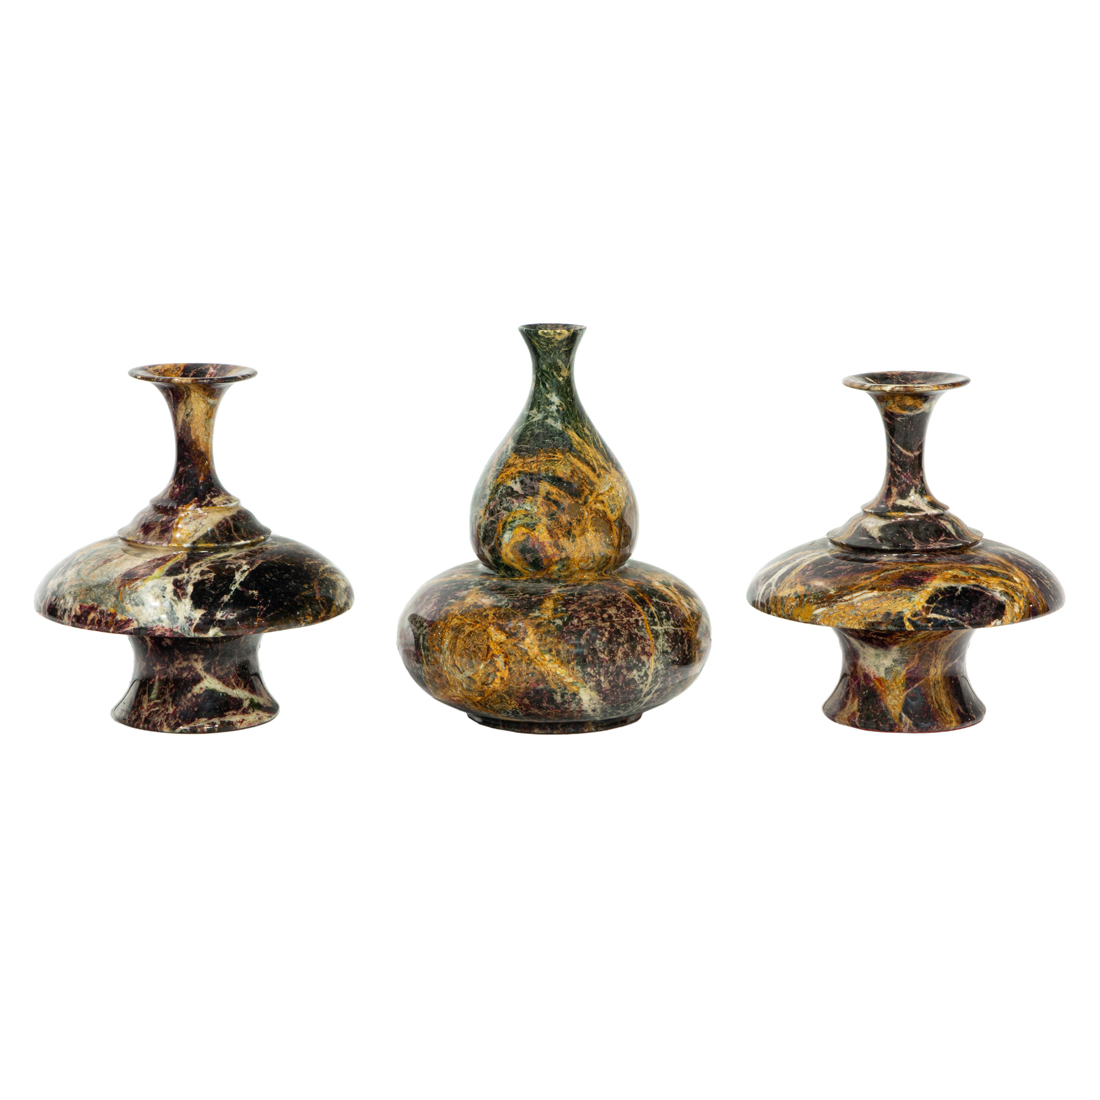 THREE CARVED AND POLISHED VARIEGATED